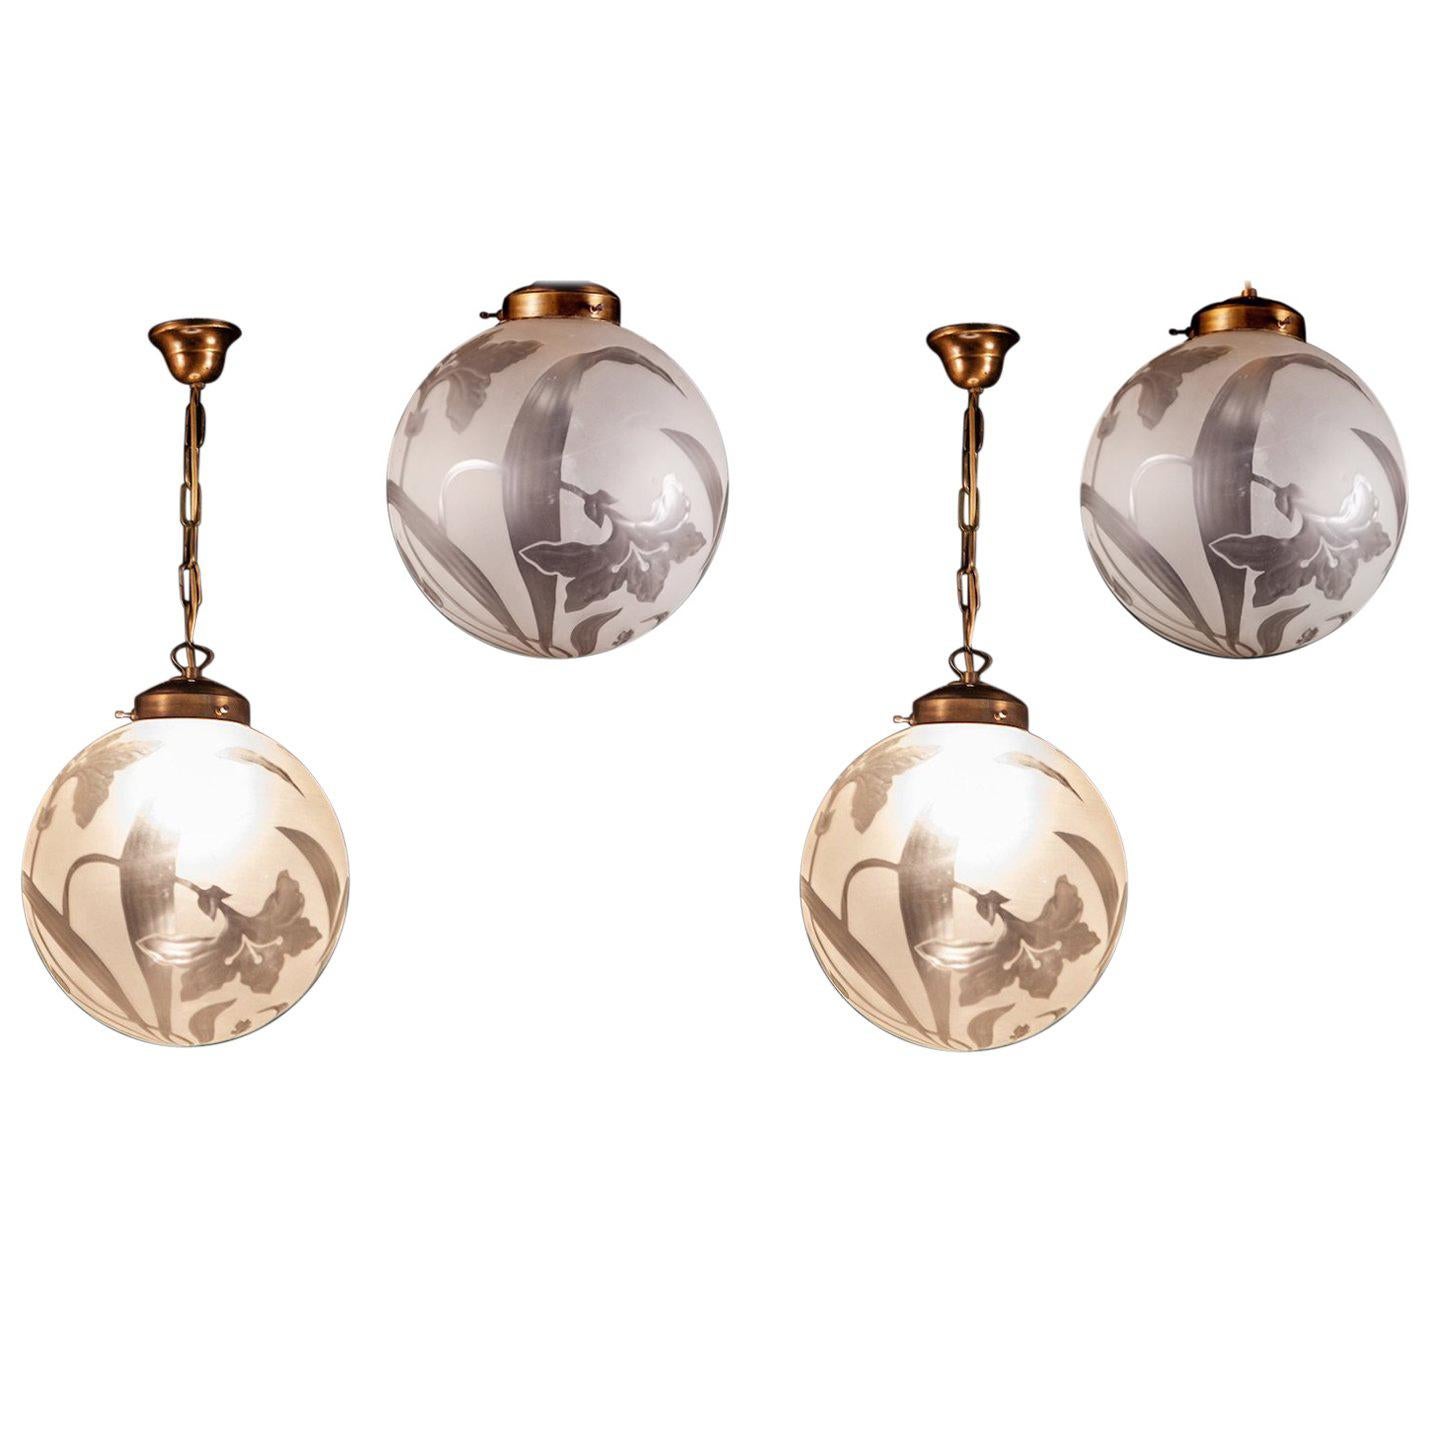 Art Deco Four Liberty Engraved Glass Sphere Chandeliers or Lanterns, Italy, 1940 For Sale